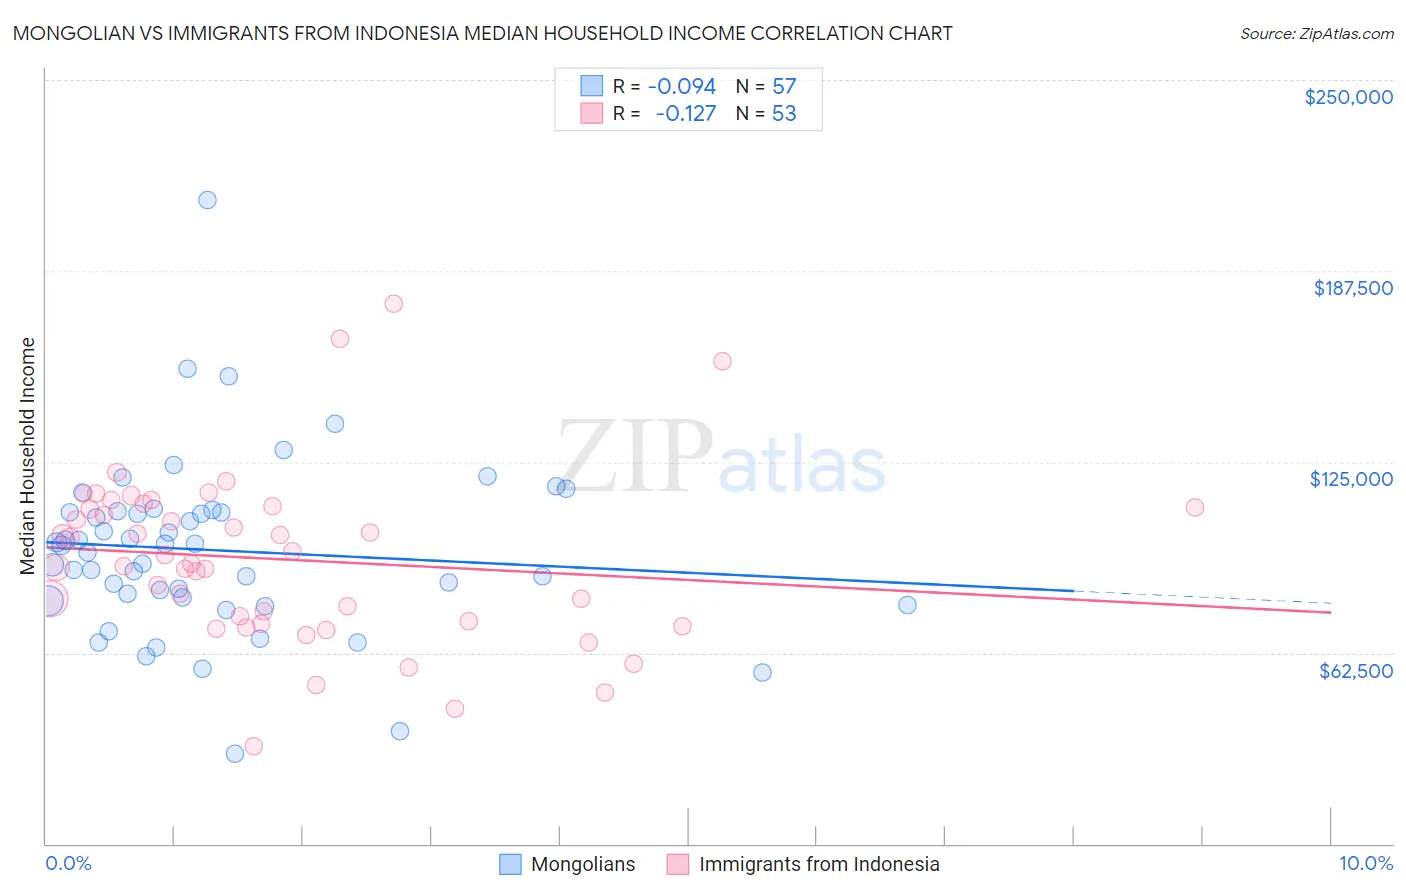 Mongolian vs Immigrants from Indonesia Median Household Income